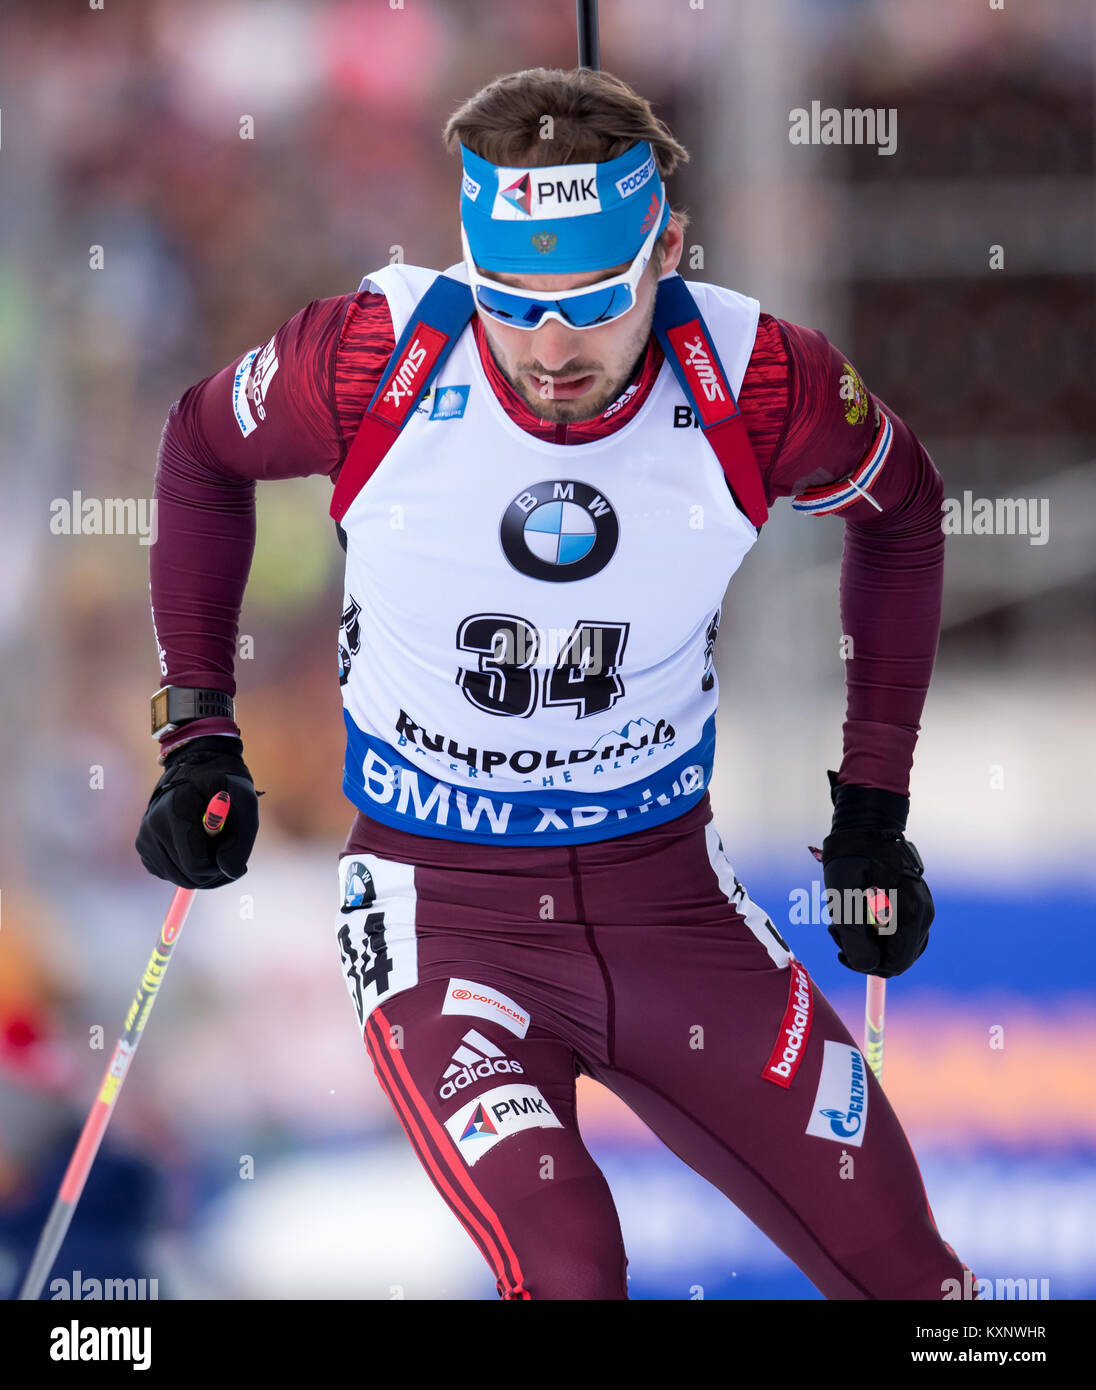 Ruhpolding, Germany. 11th Jan, 2018. Biathlet Anton Schipulin from Rusia skis during the race at Chiemgau Arena in Ruhpolding, Germany, 11 January 2018. Credit: Sven Hoppe/dpa/Alamy Live News Stock Photo